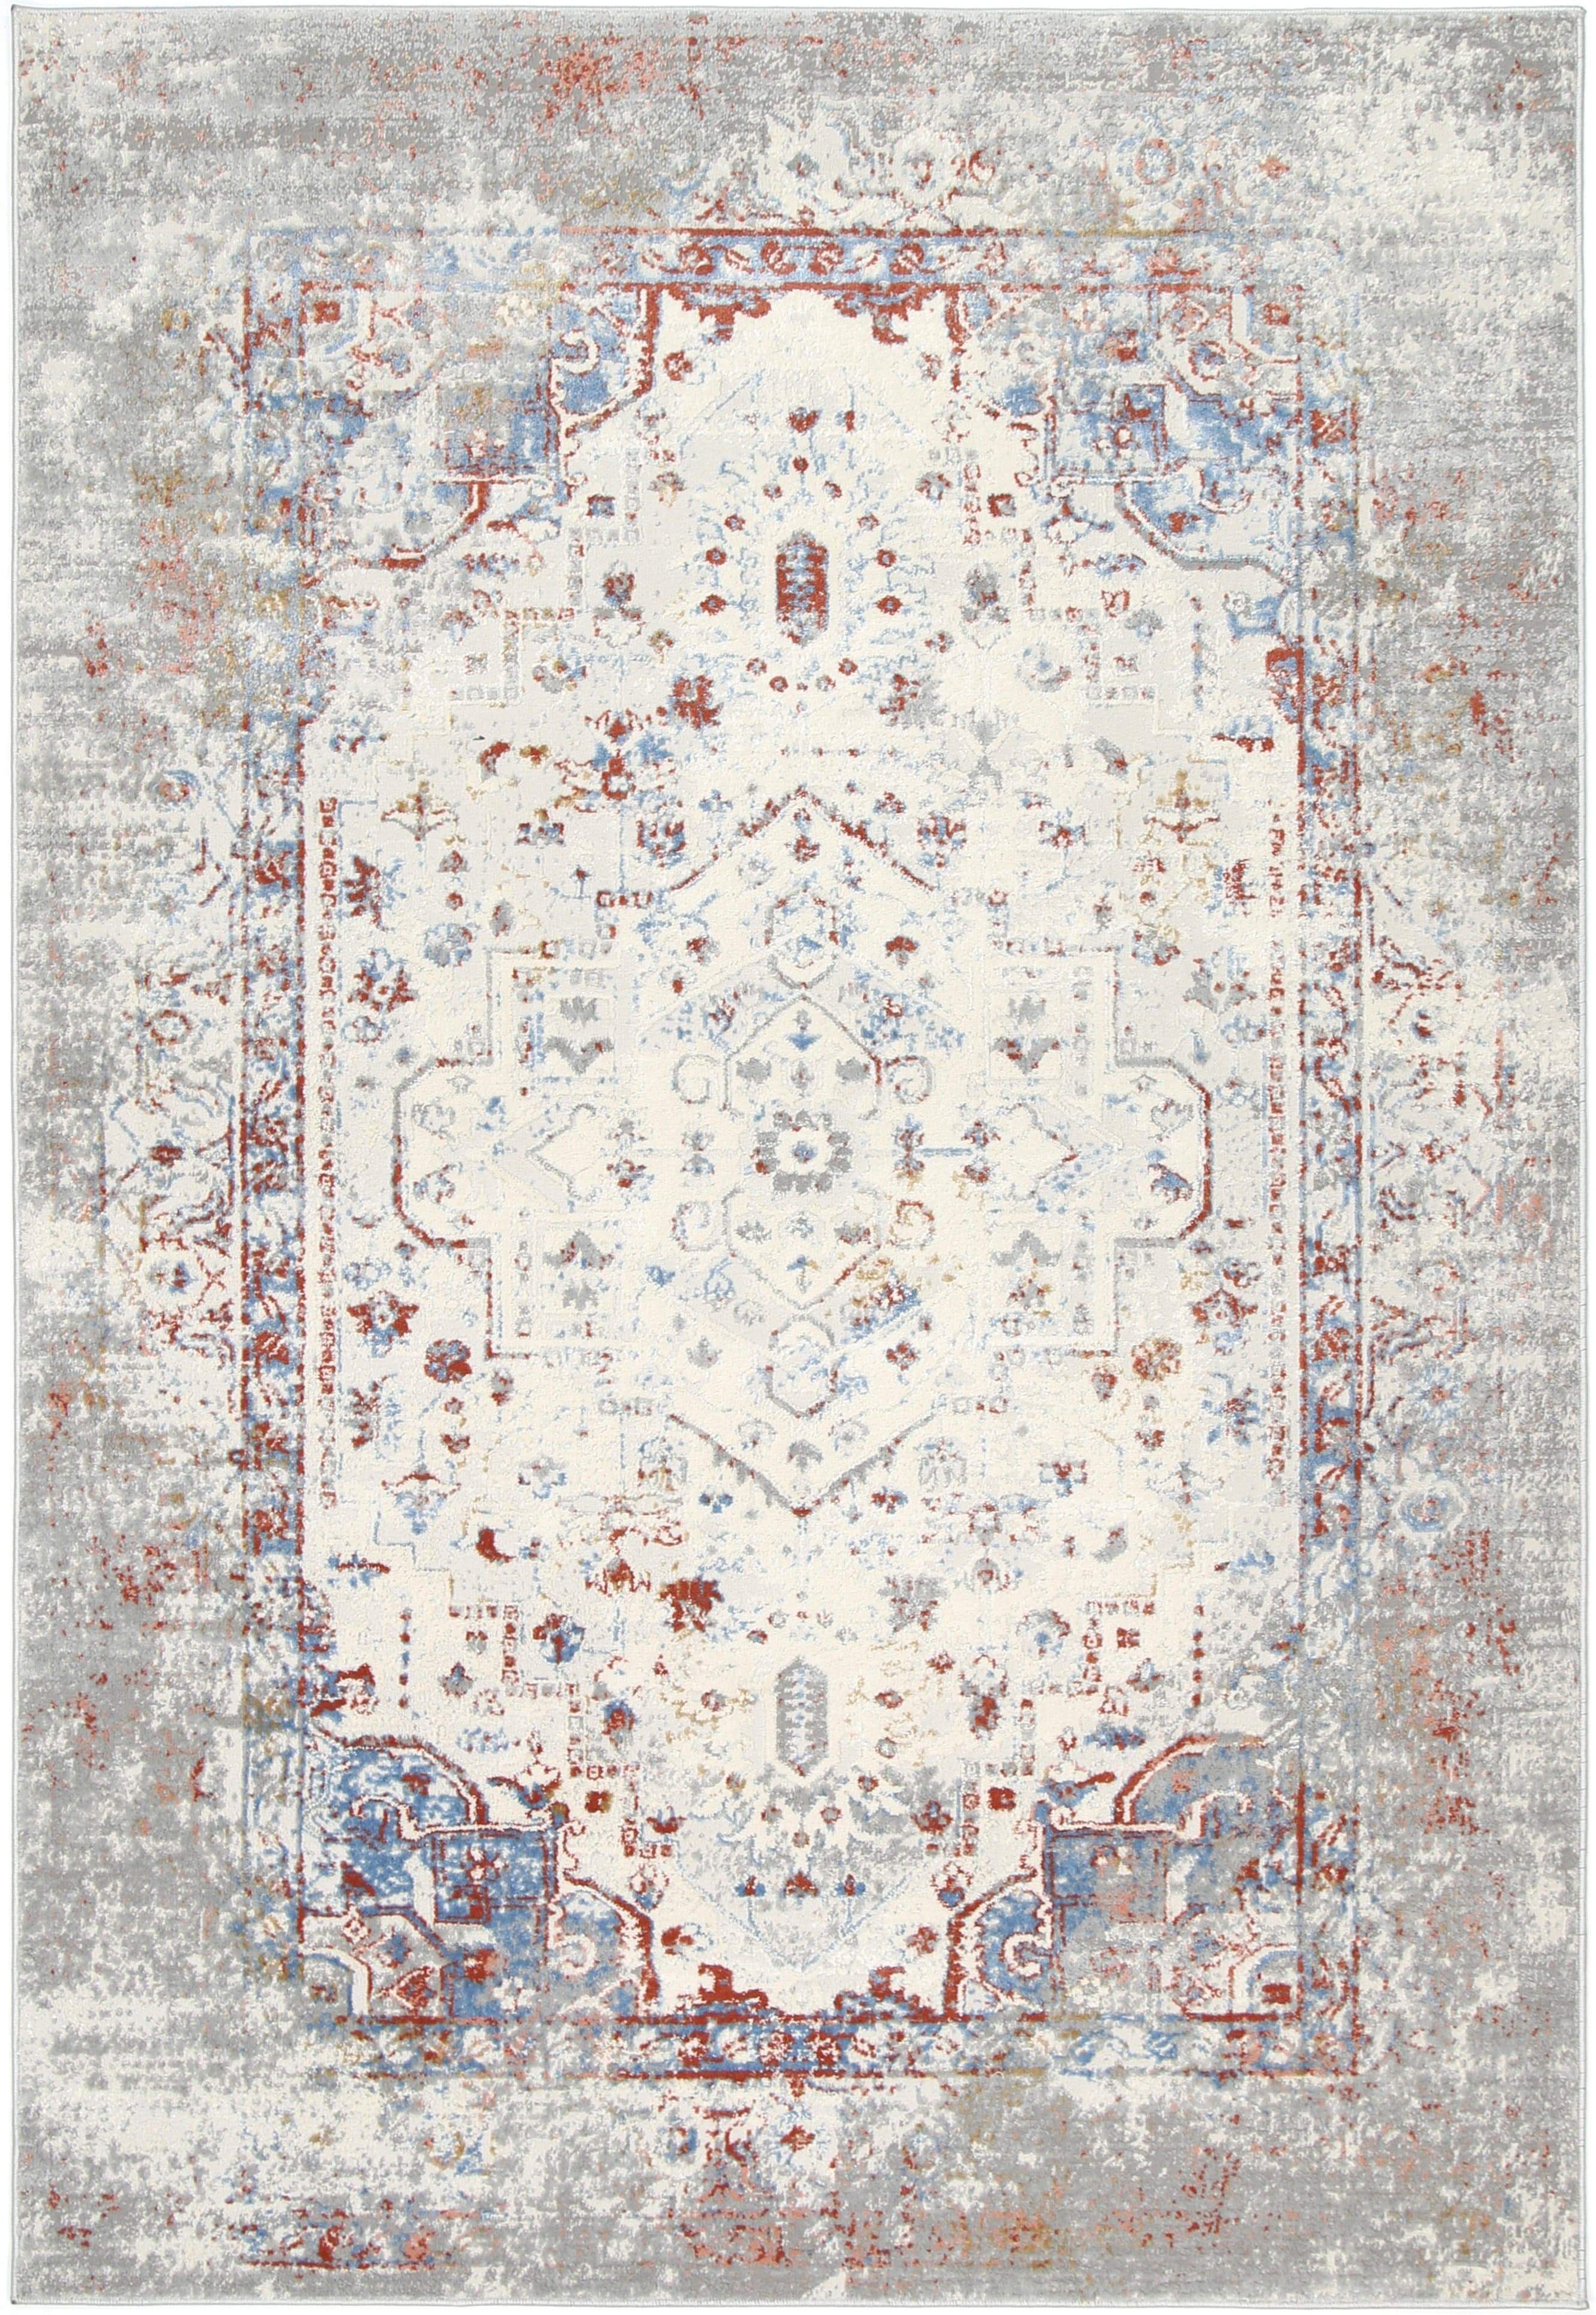 Artistry Franz Transitional In Grey & Multicolour Rug